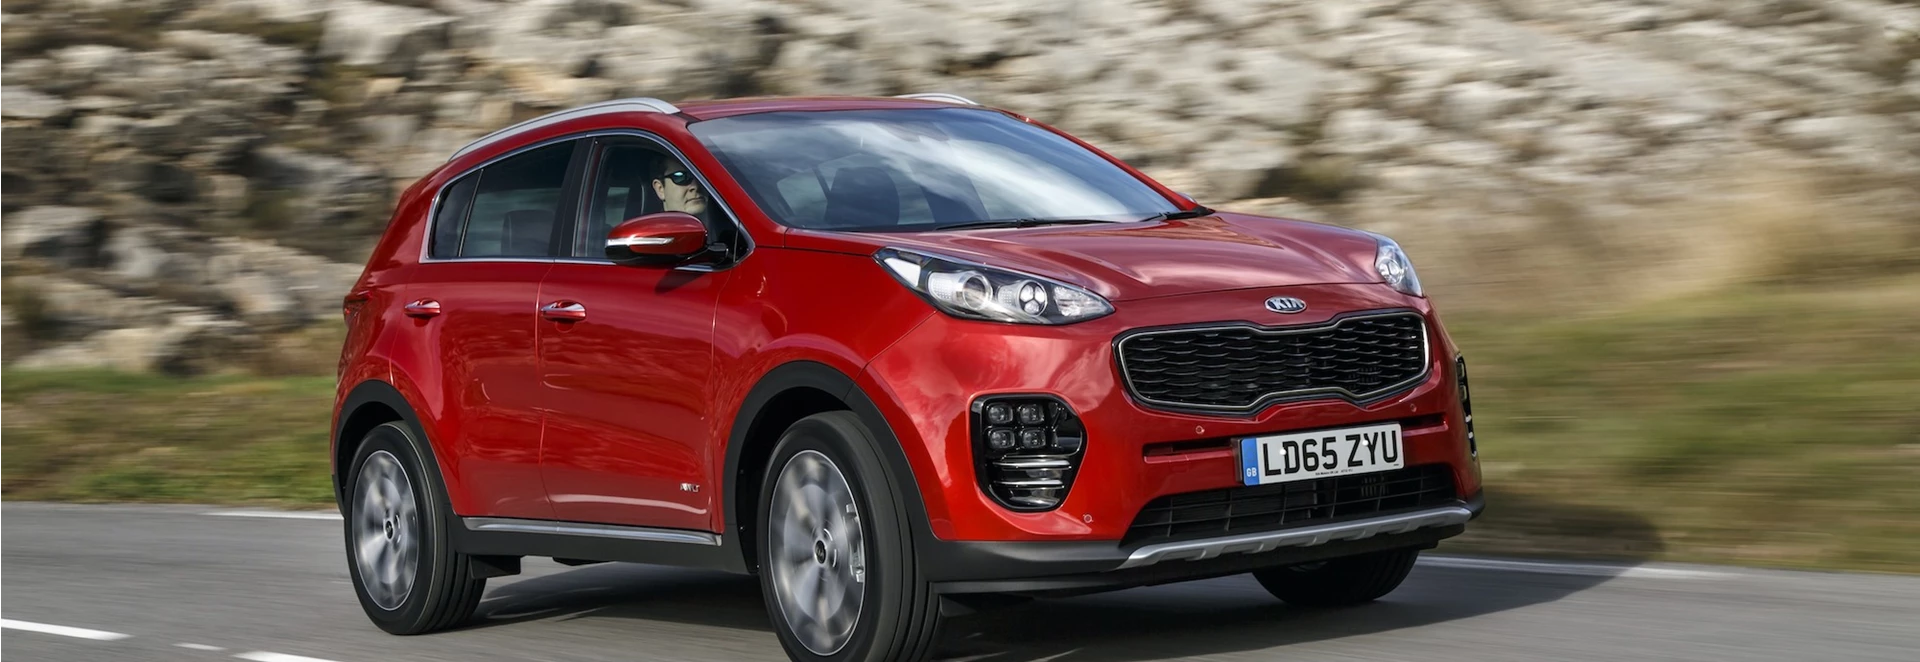 Kia to introduce diesel-hybrid powertrain later this year